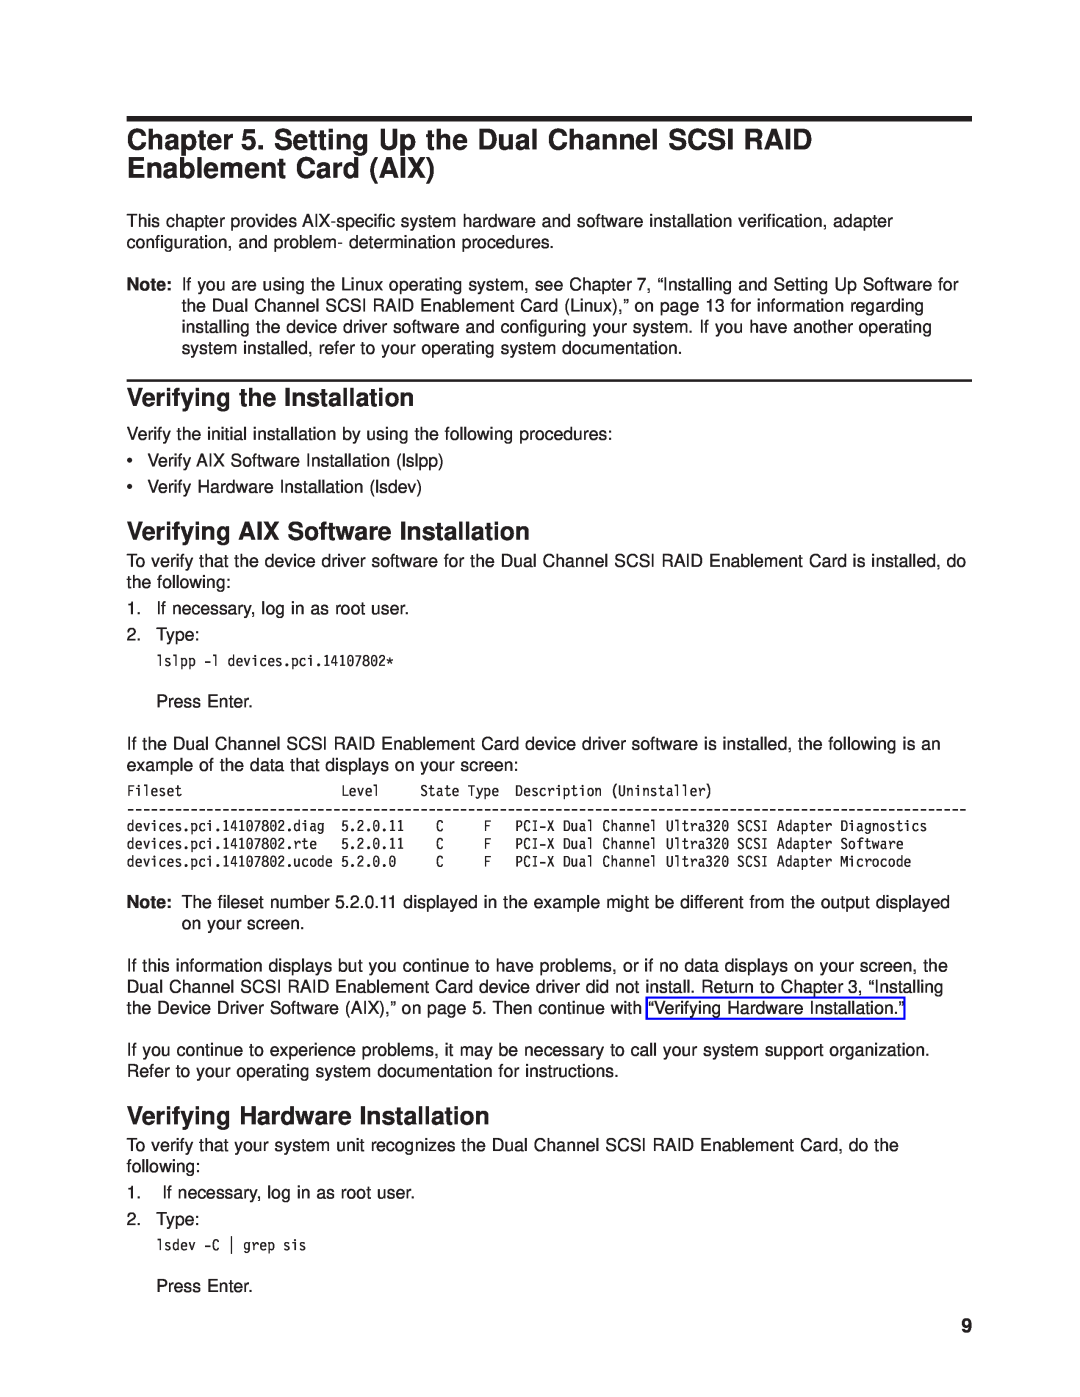 IBM SA23-1325-01 manual Setting Up the Dual Channel SCSI RAID Enablement Card AIX, Verifying the Installation 